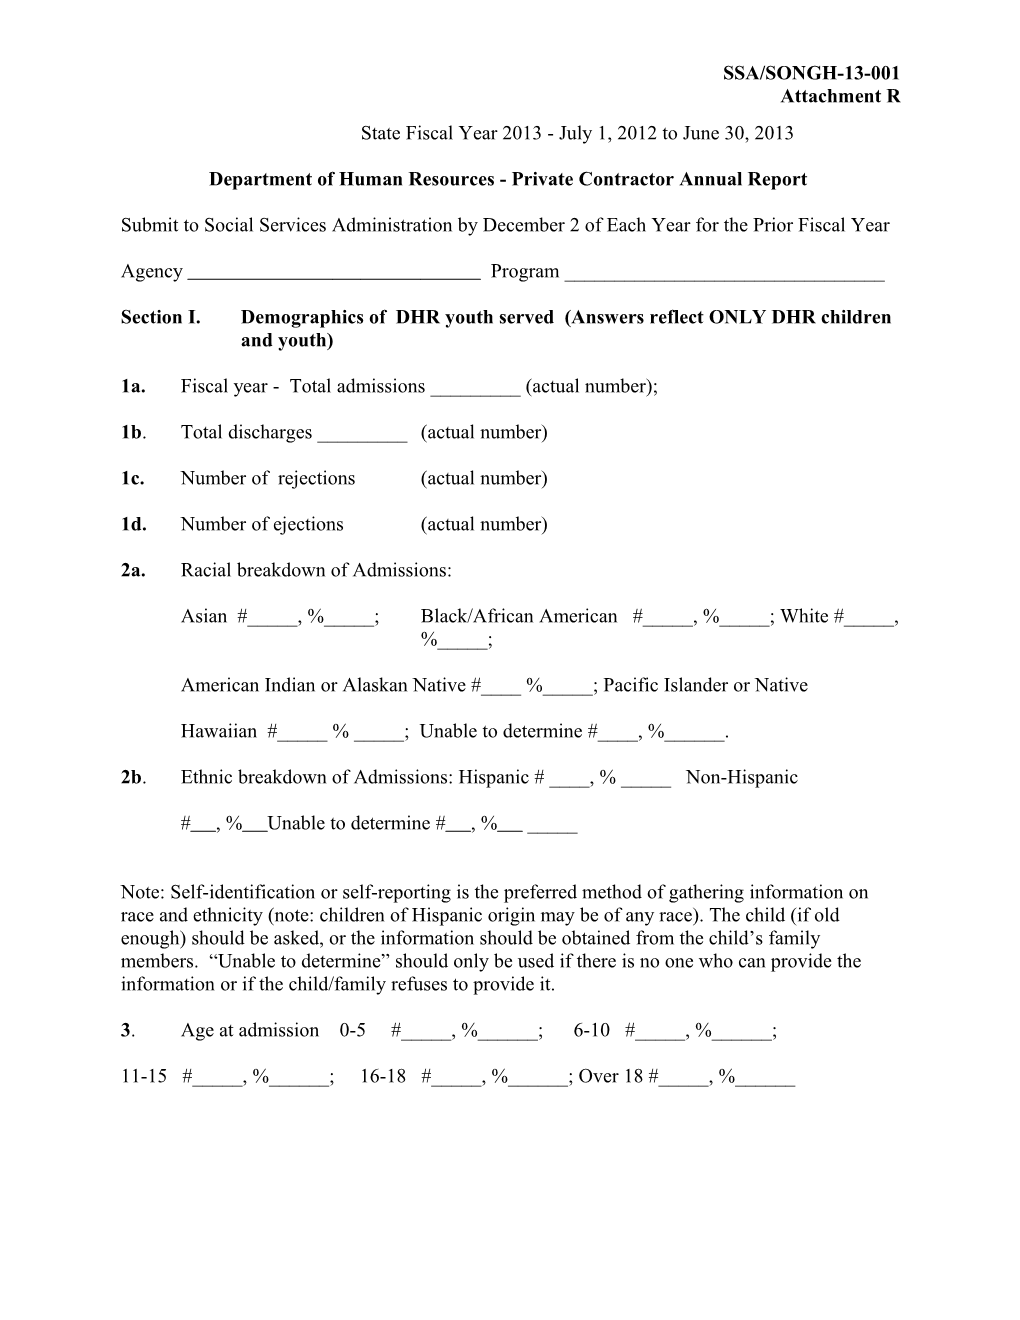 Department of Human Resources - Private Contractor Annual Report